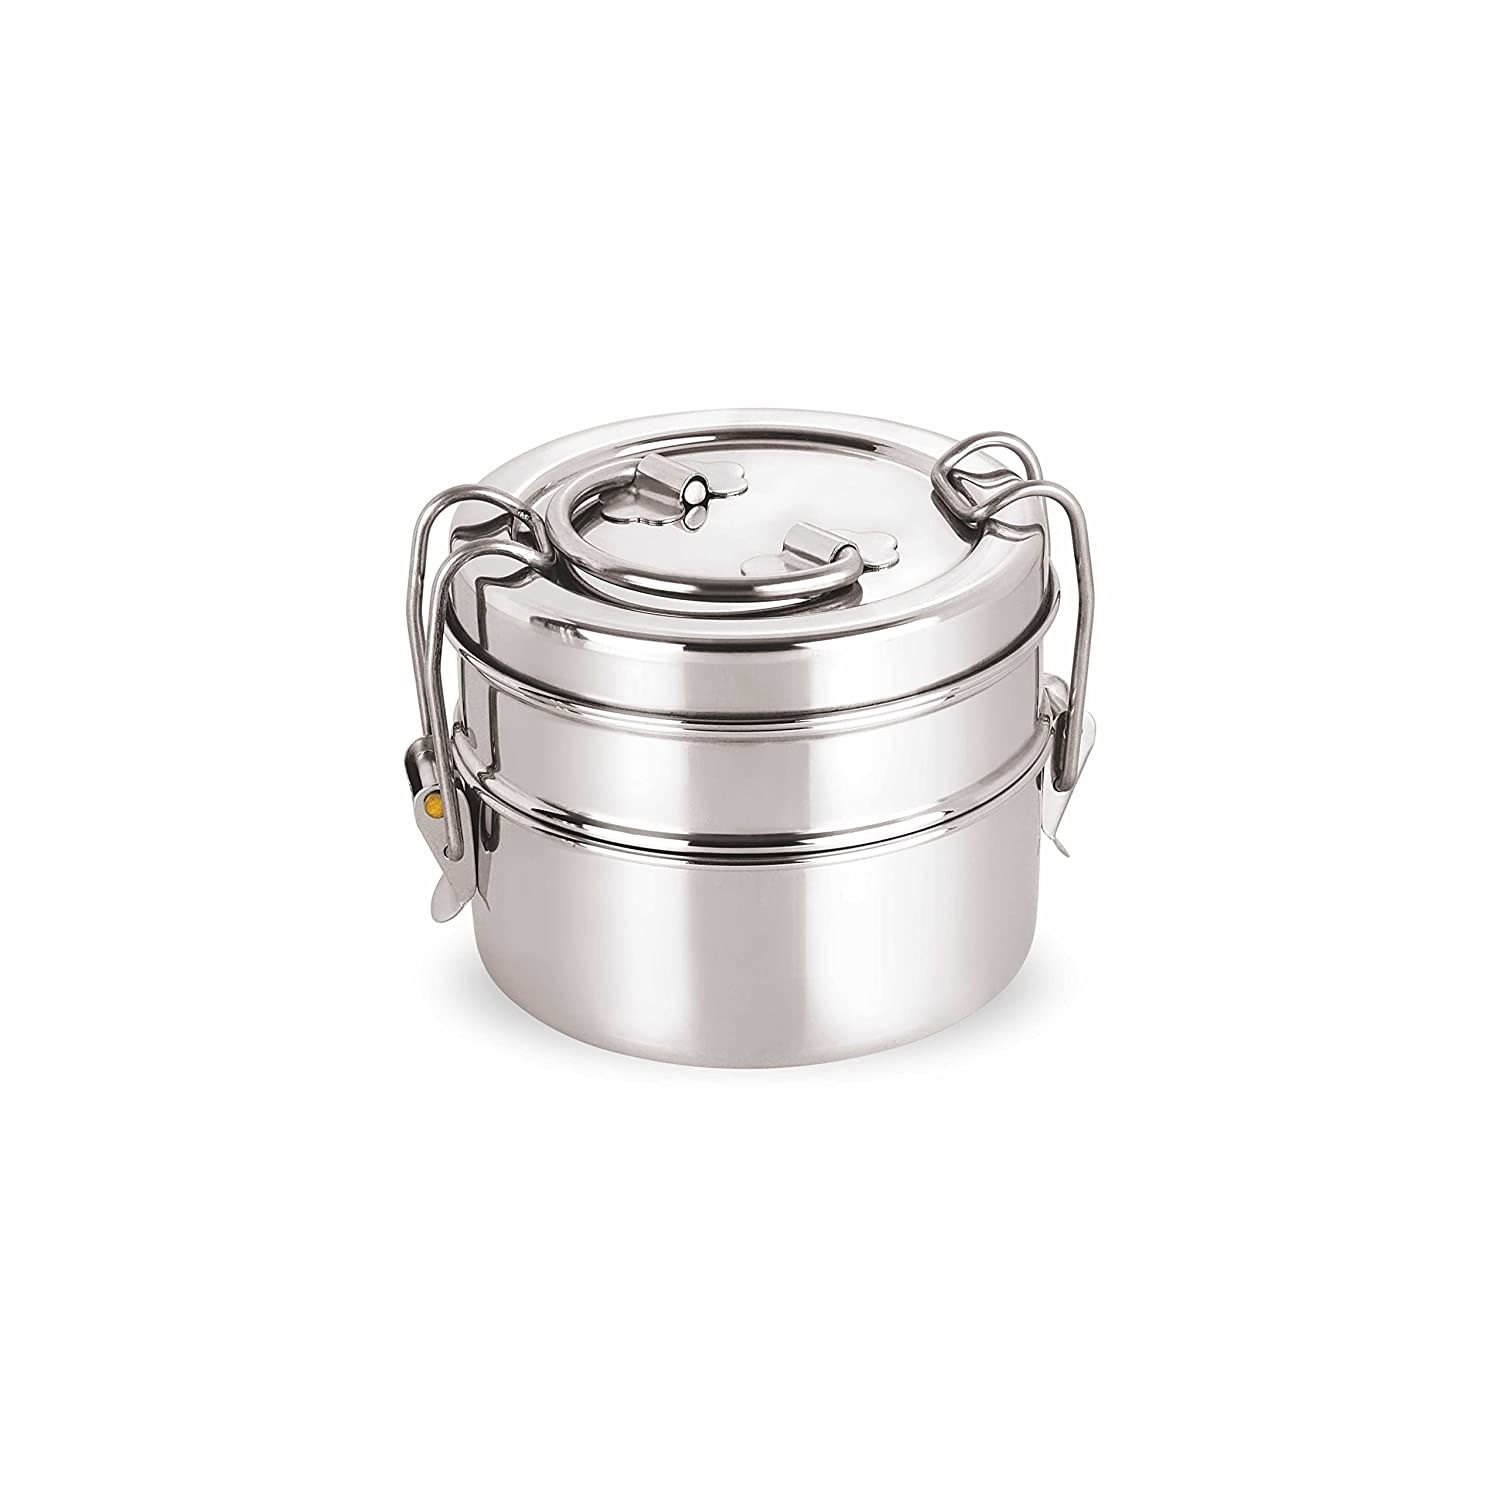     			Neelam Clipper Stainless Steel Tiffin Box Set, 2-Pieces, Silver-800 ml